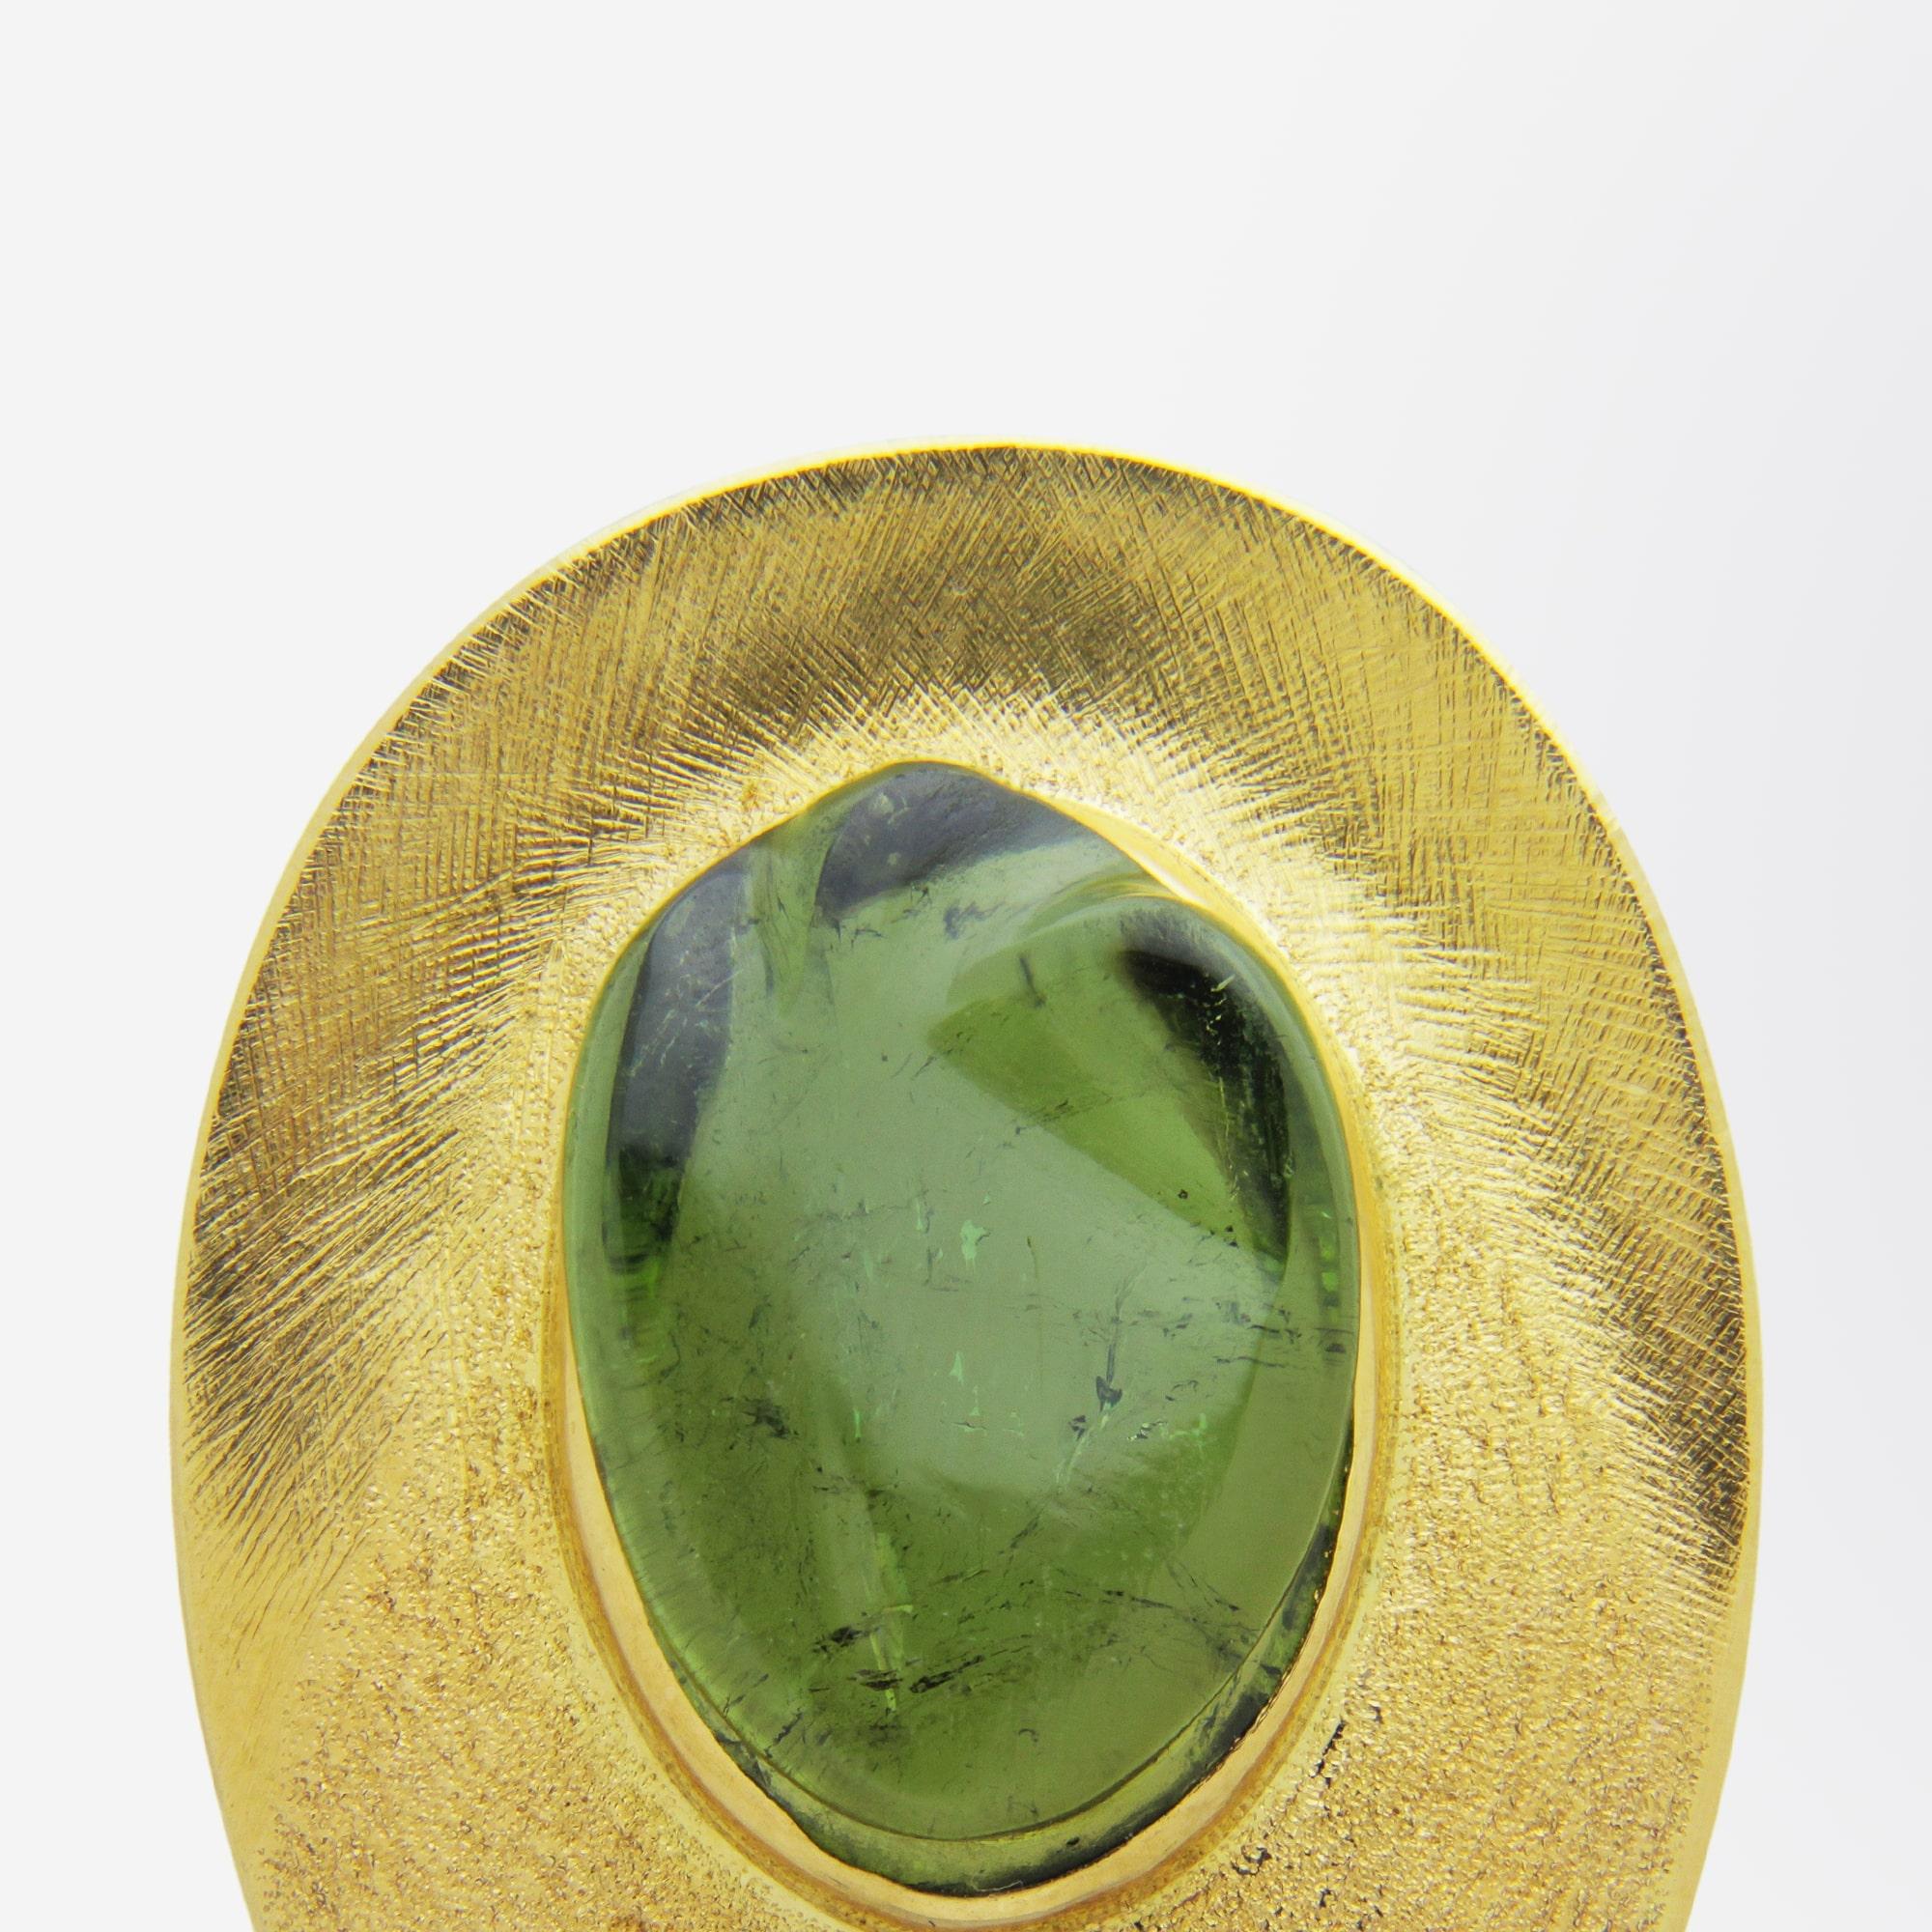 A really beautiful 'forme livre' carved green tourmaline set in a gold brooch setting by Brazilian designer, Haroldo Burle Marx. This piece has a beautifully textured mount, a signature of the work of Burle Marx, which has been set with a rich green